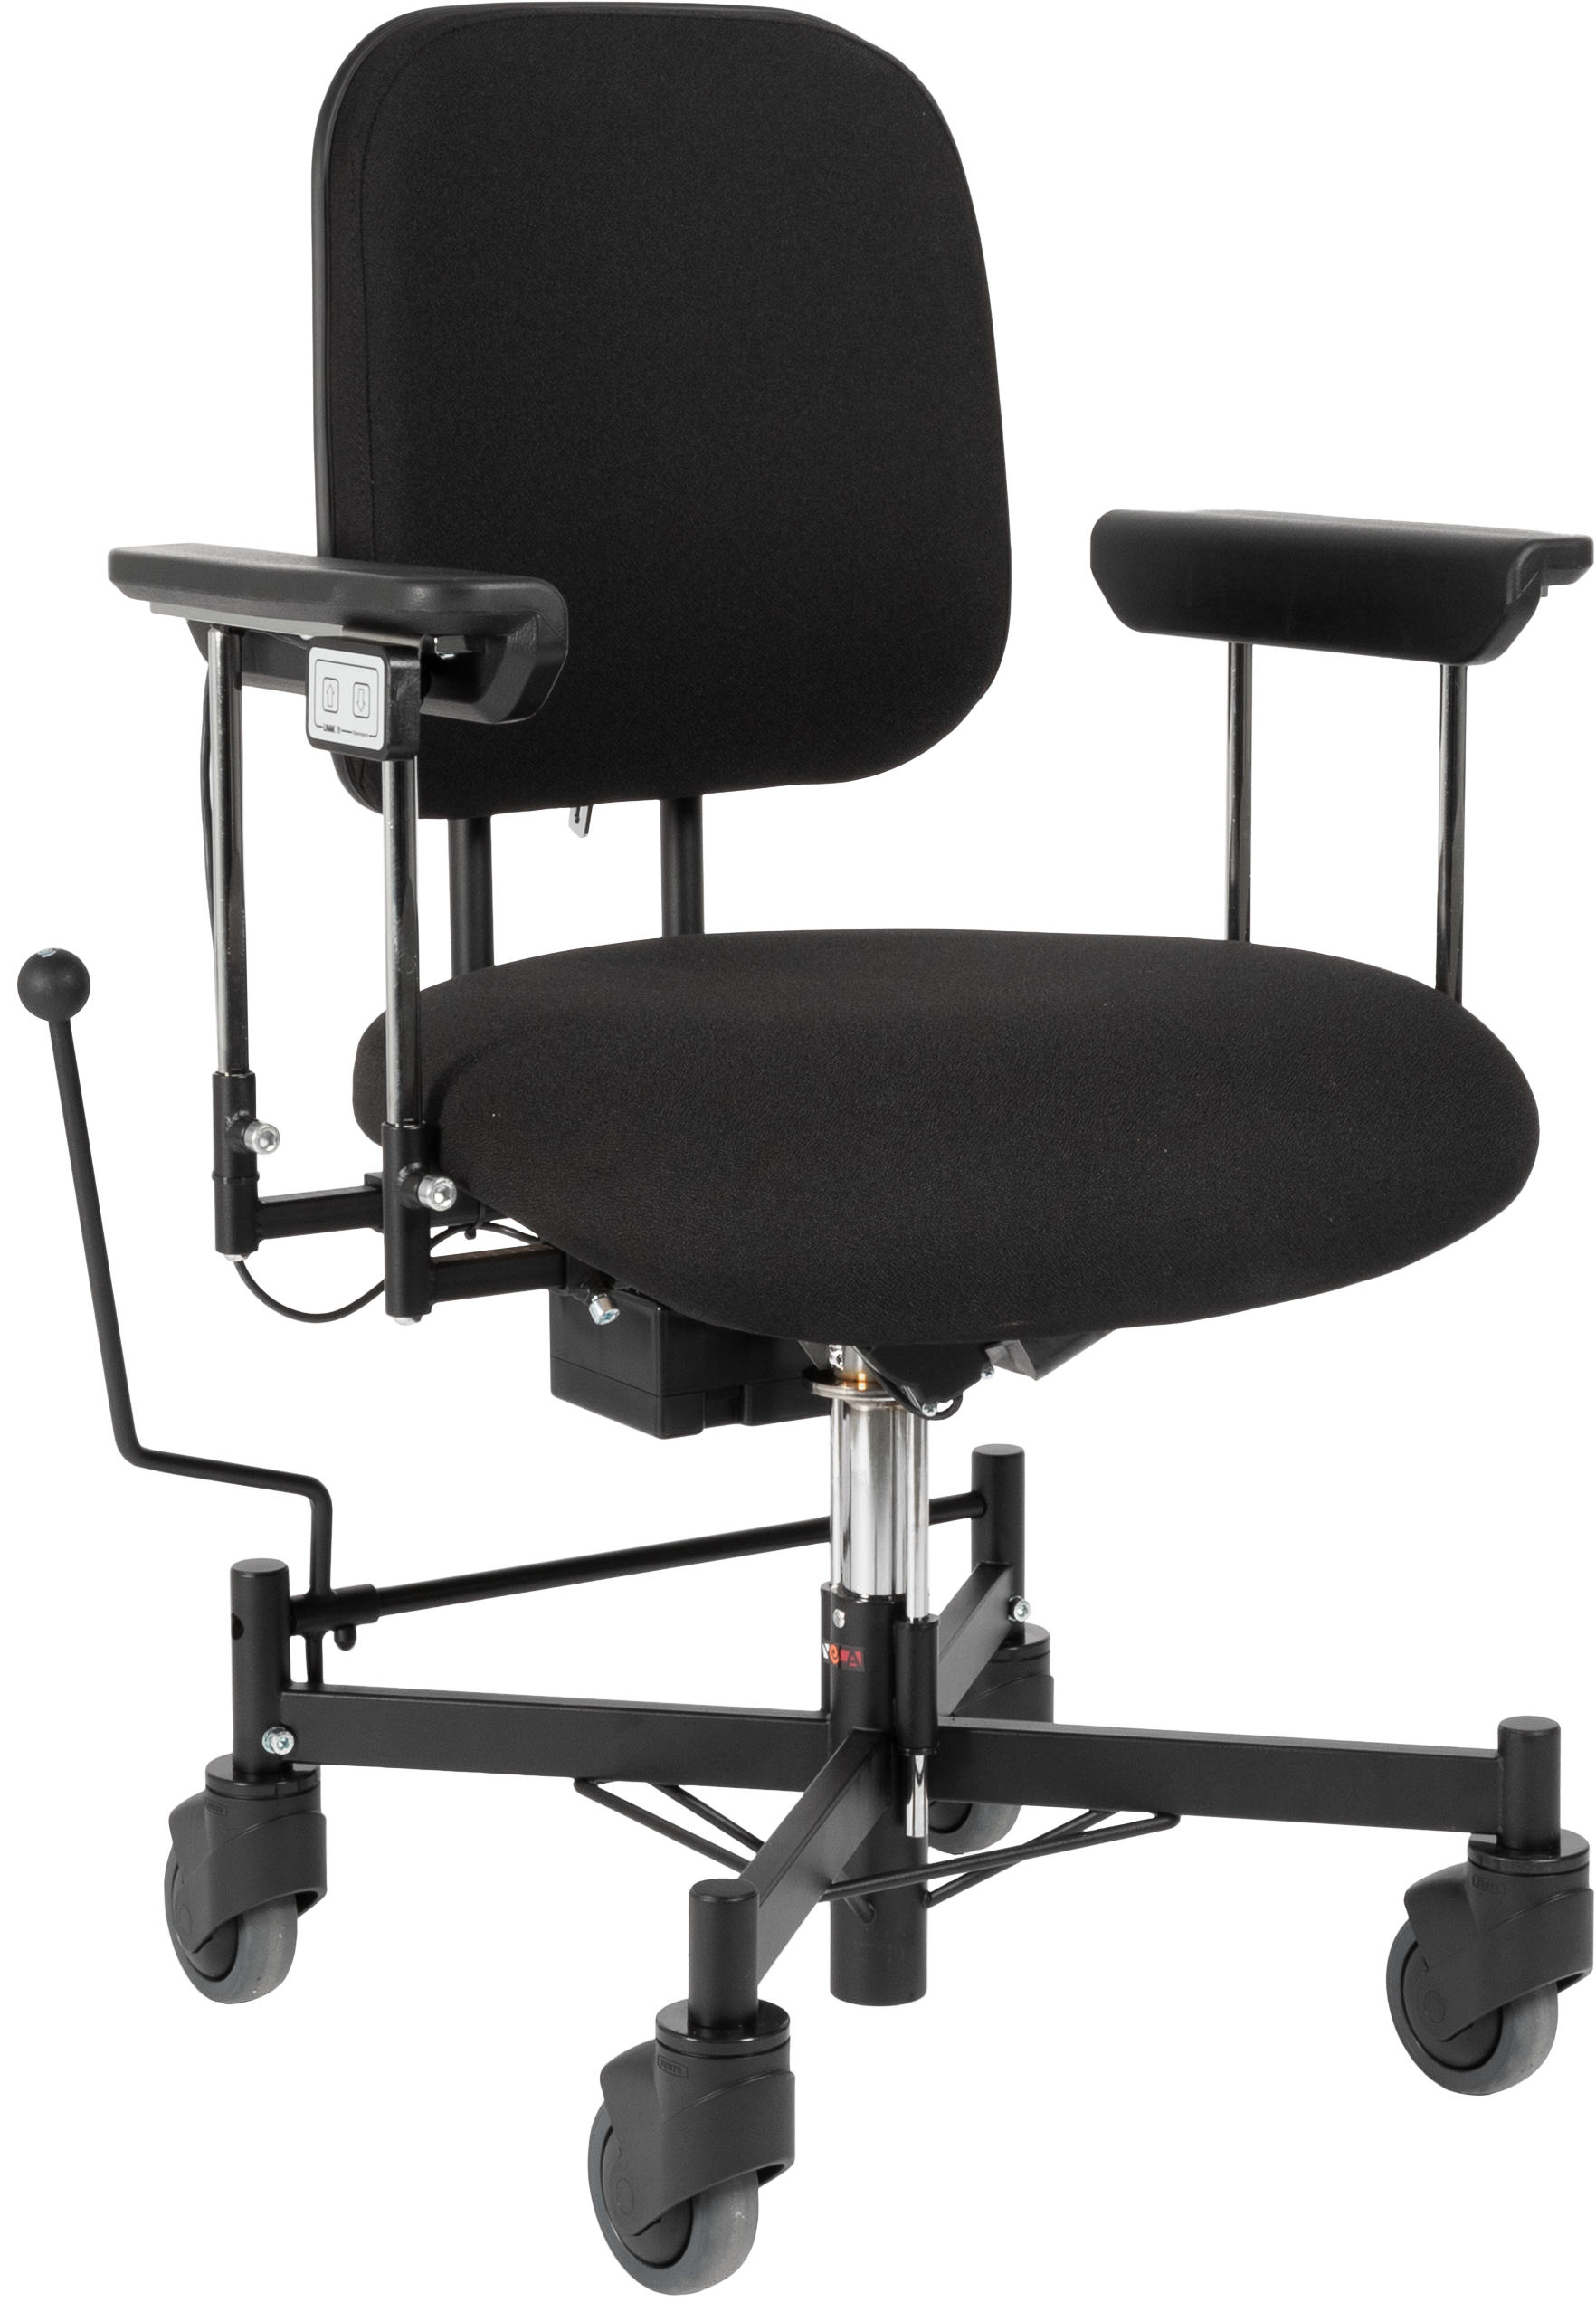 Vela 300 bariatric chair front, right chair in black.